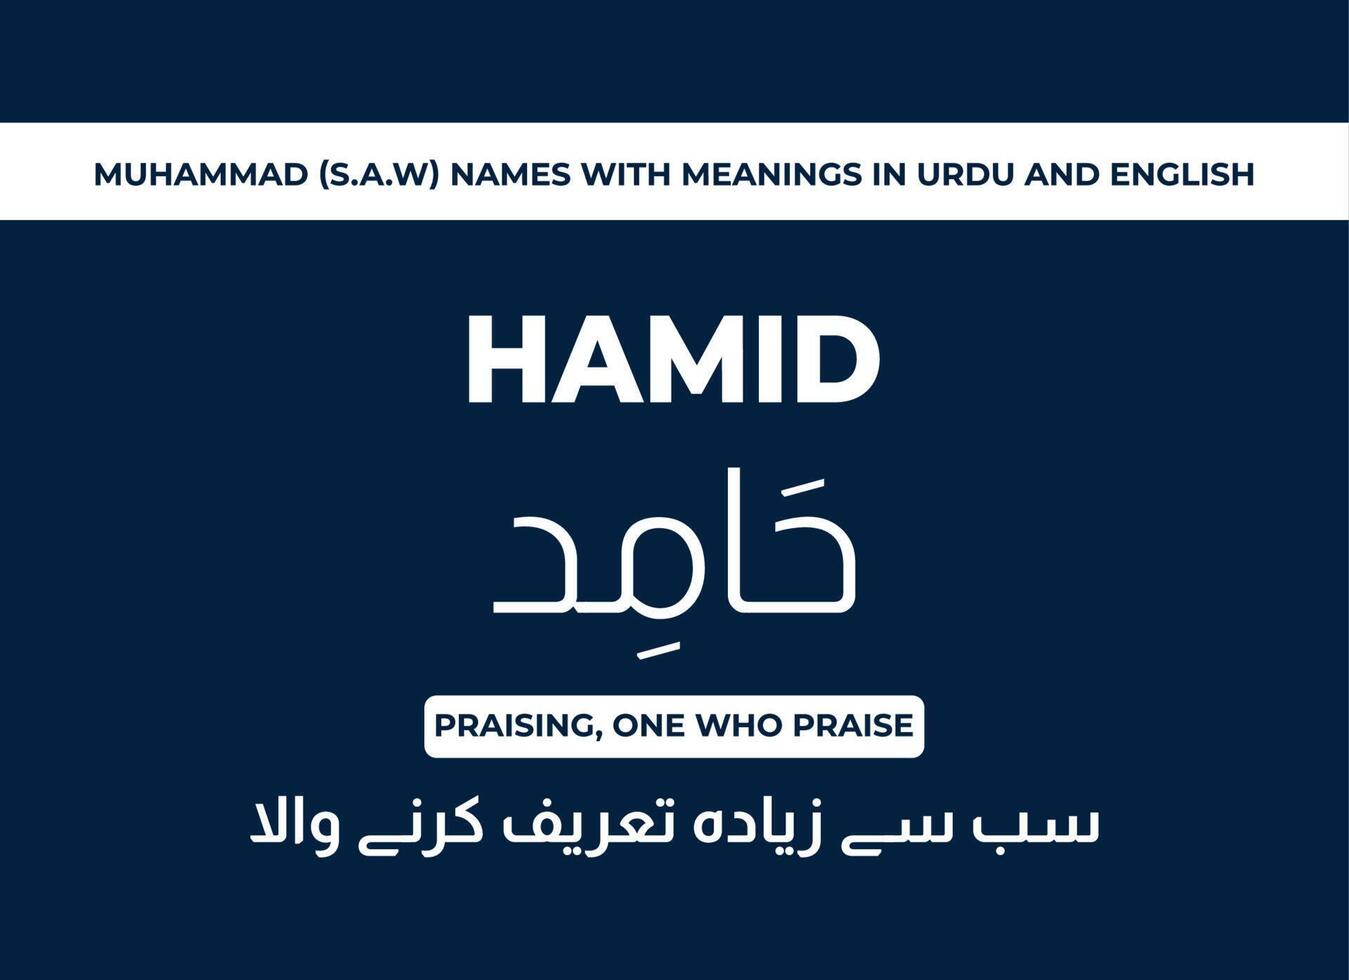 Muhammad S.A.W Names with Meanings in Urdu and English vector